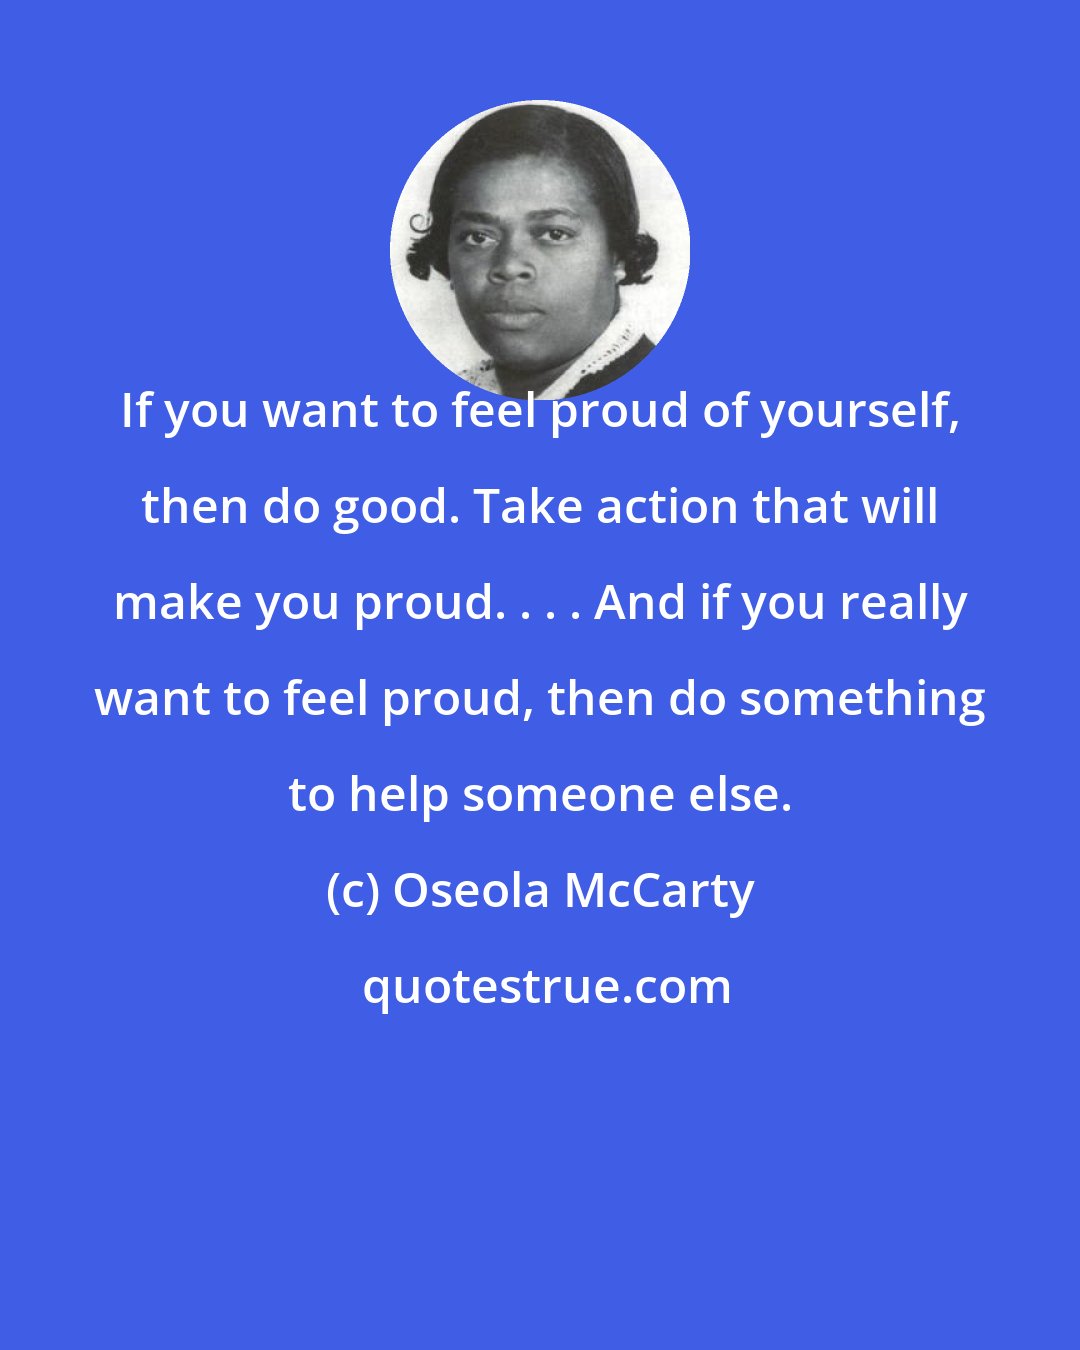 Oseola McCarty: If you want to feel proud of yourself, then do good. Take action that will make you proud. . . . And if you really want to feel proud, then do something to help someone else.